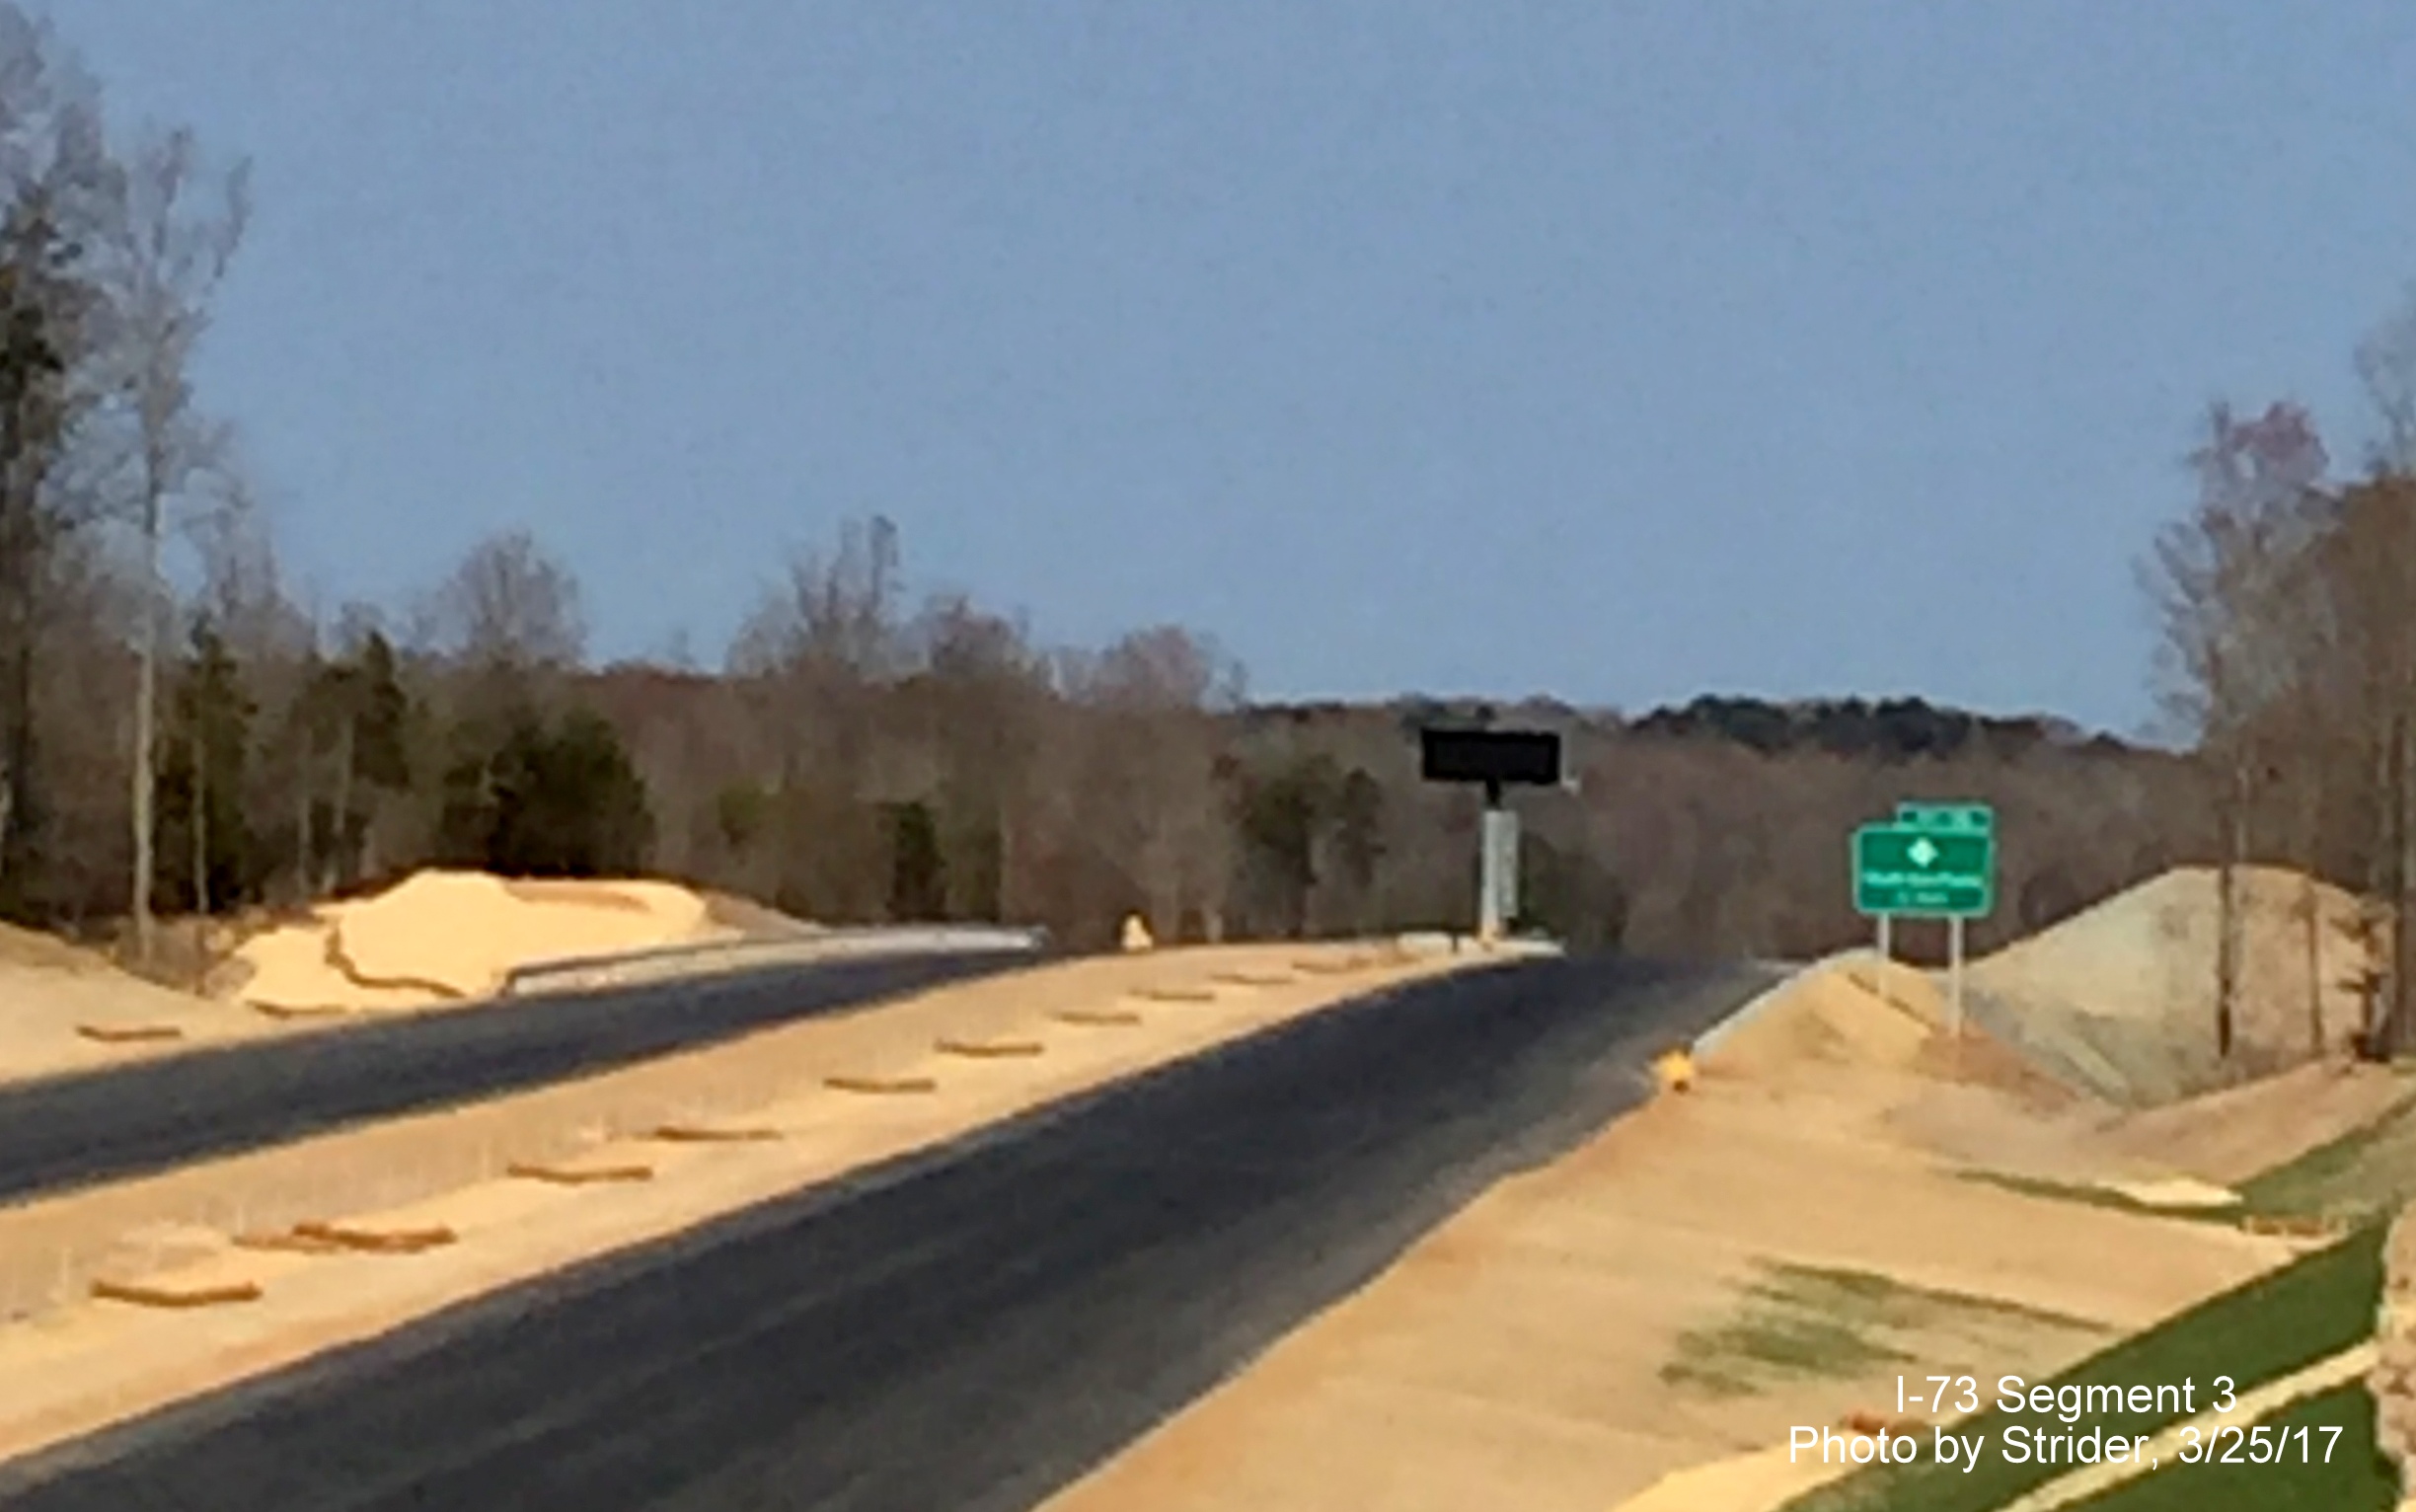 Image of view south from Bunch Rd showing installation of new sign for NC 150 exit, by Strider